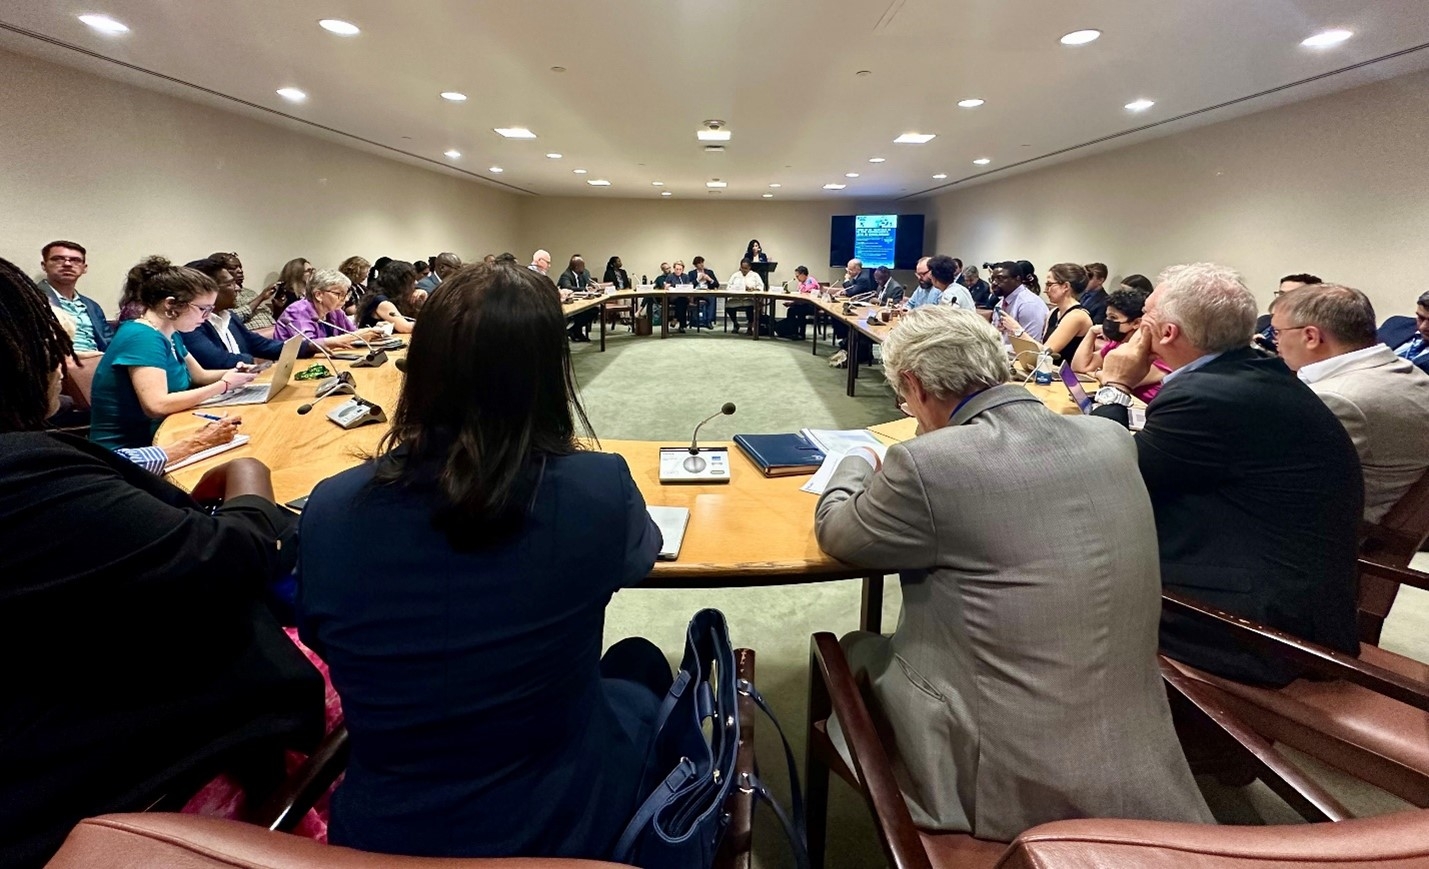 Director Rossi giving welcoming remarks for the official United States side event Turning the Tide: Scaling SDG for the Future, Reinforcing Access to Justice, and Advancing Democracy.